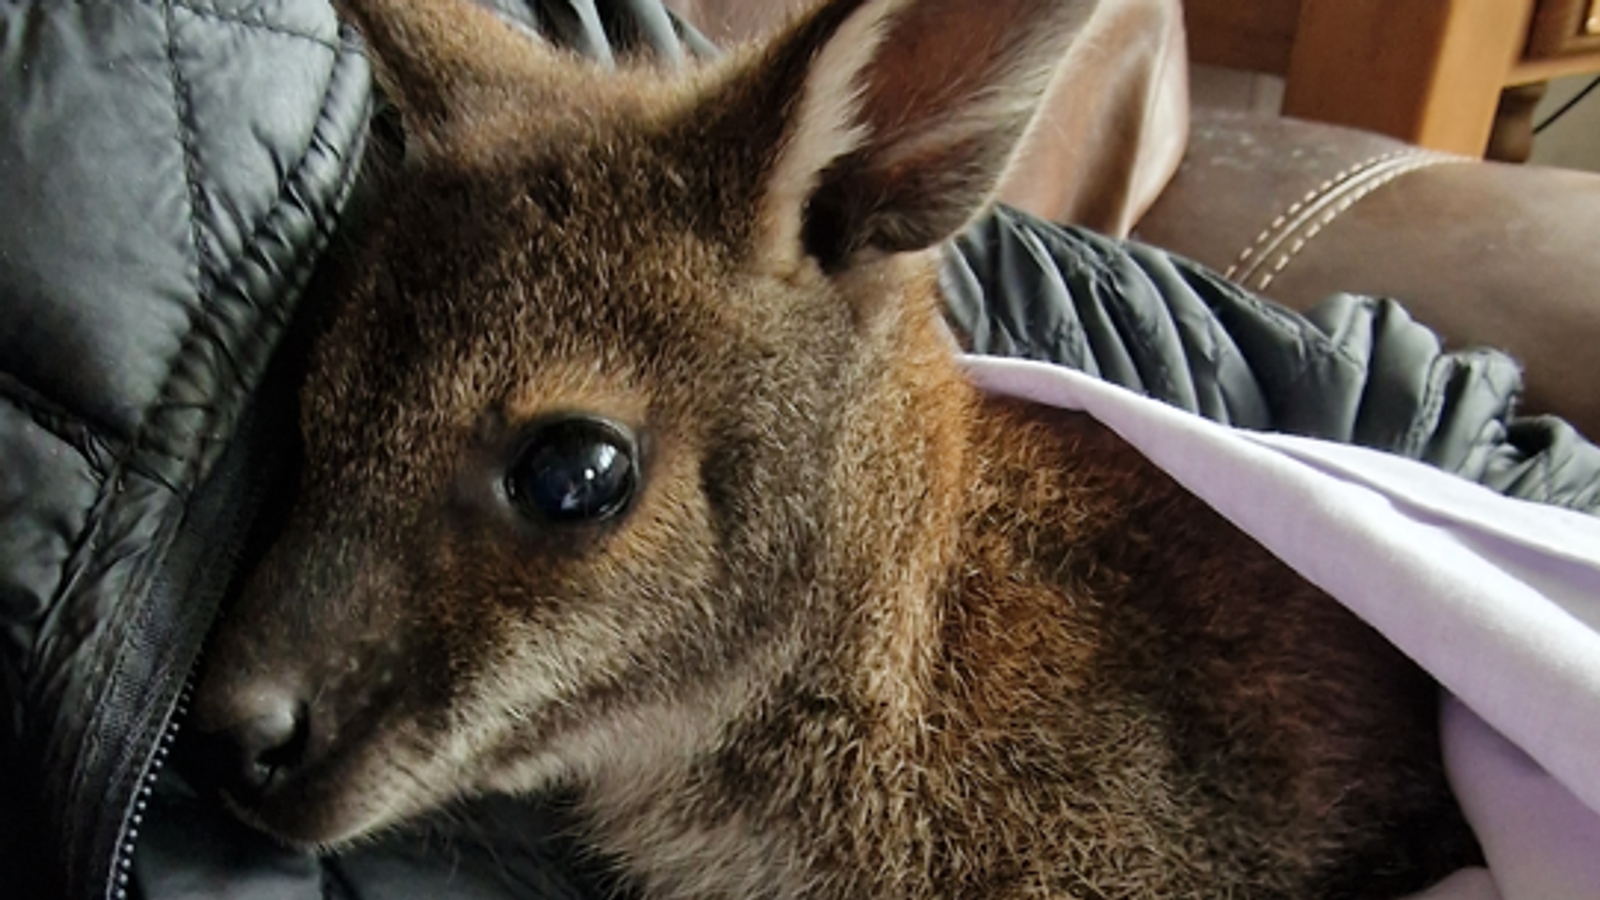 North Wales Police issue appeal to find baby wallaby reported stolen